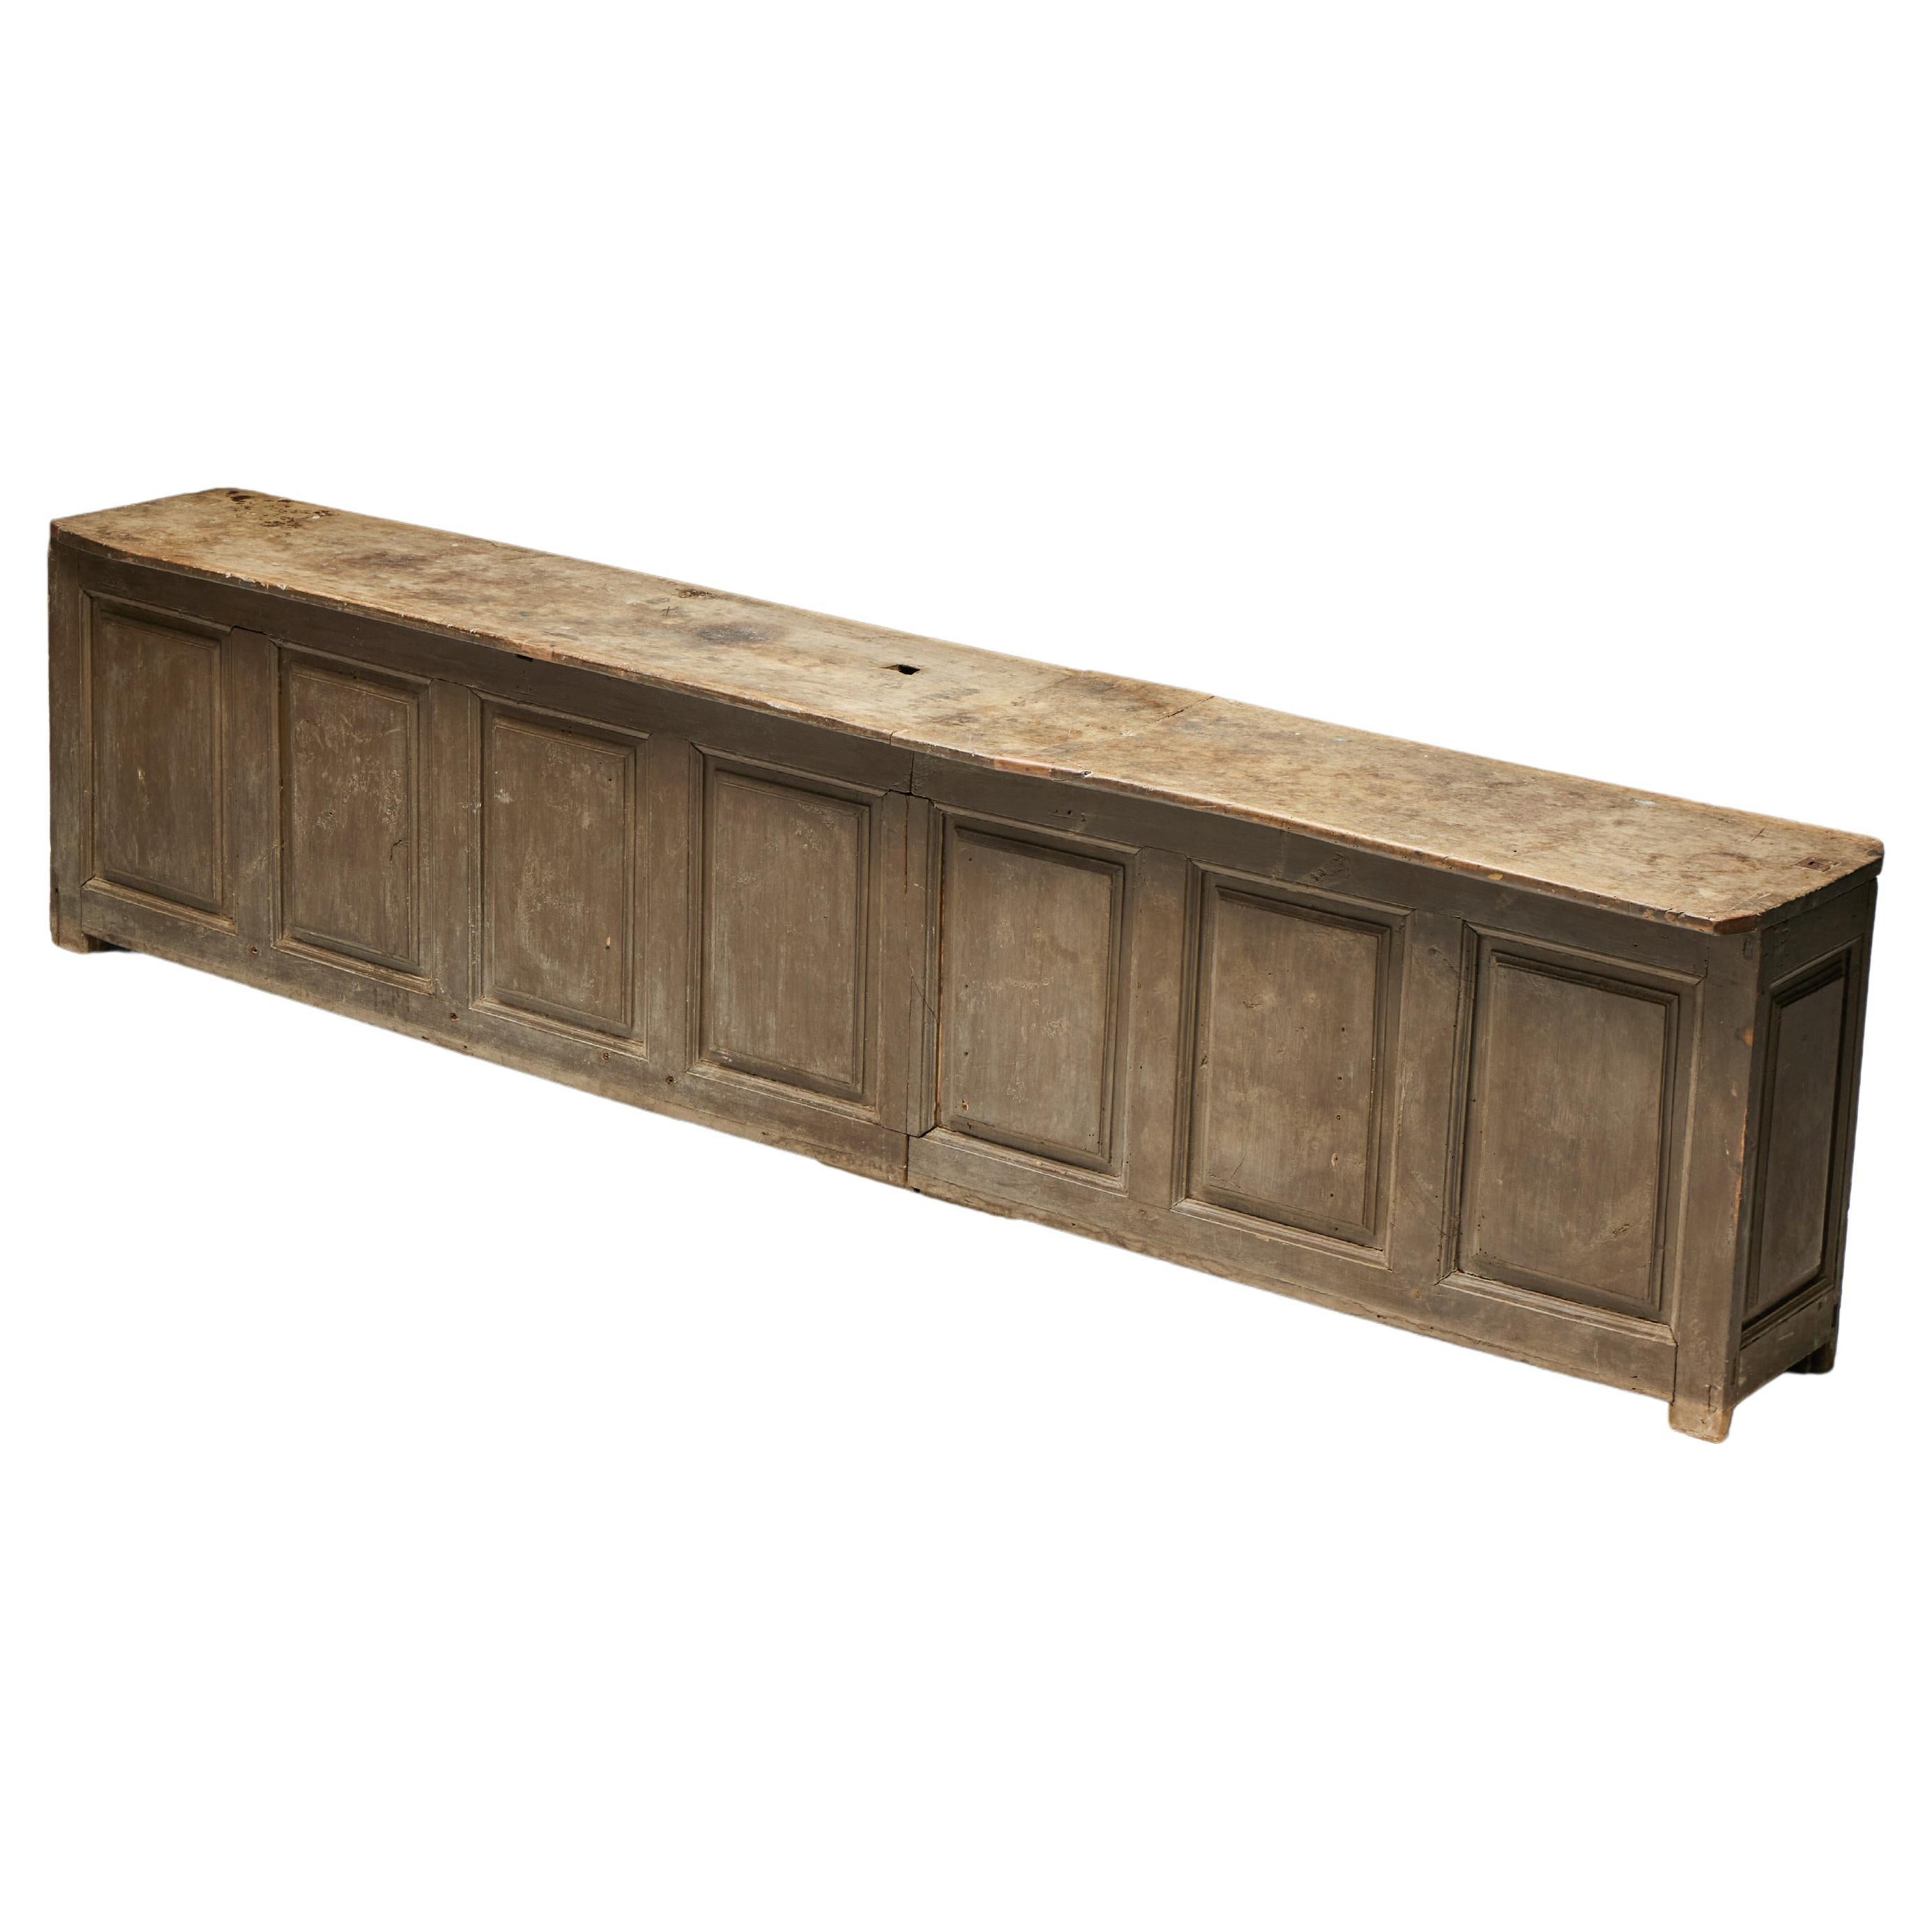 Rustic Art Populaire Freestanding Bar Counter, France, 19th Century